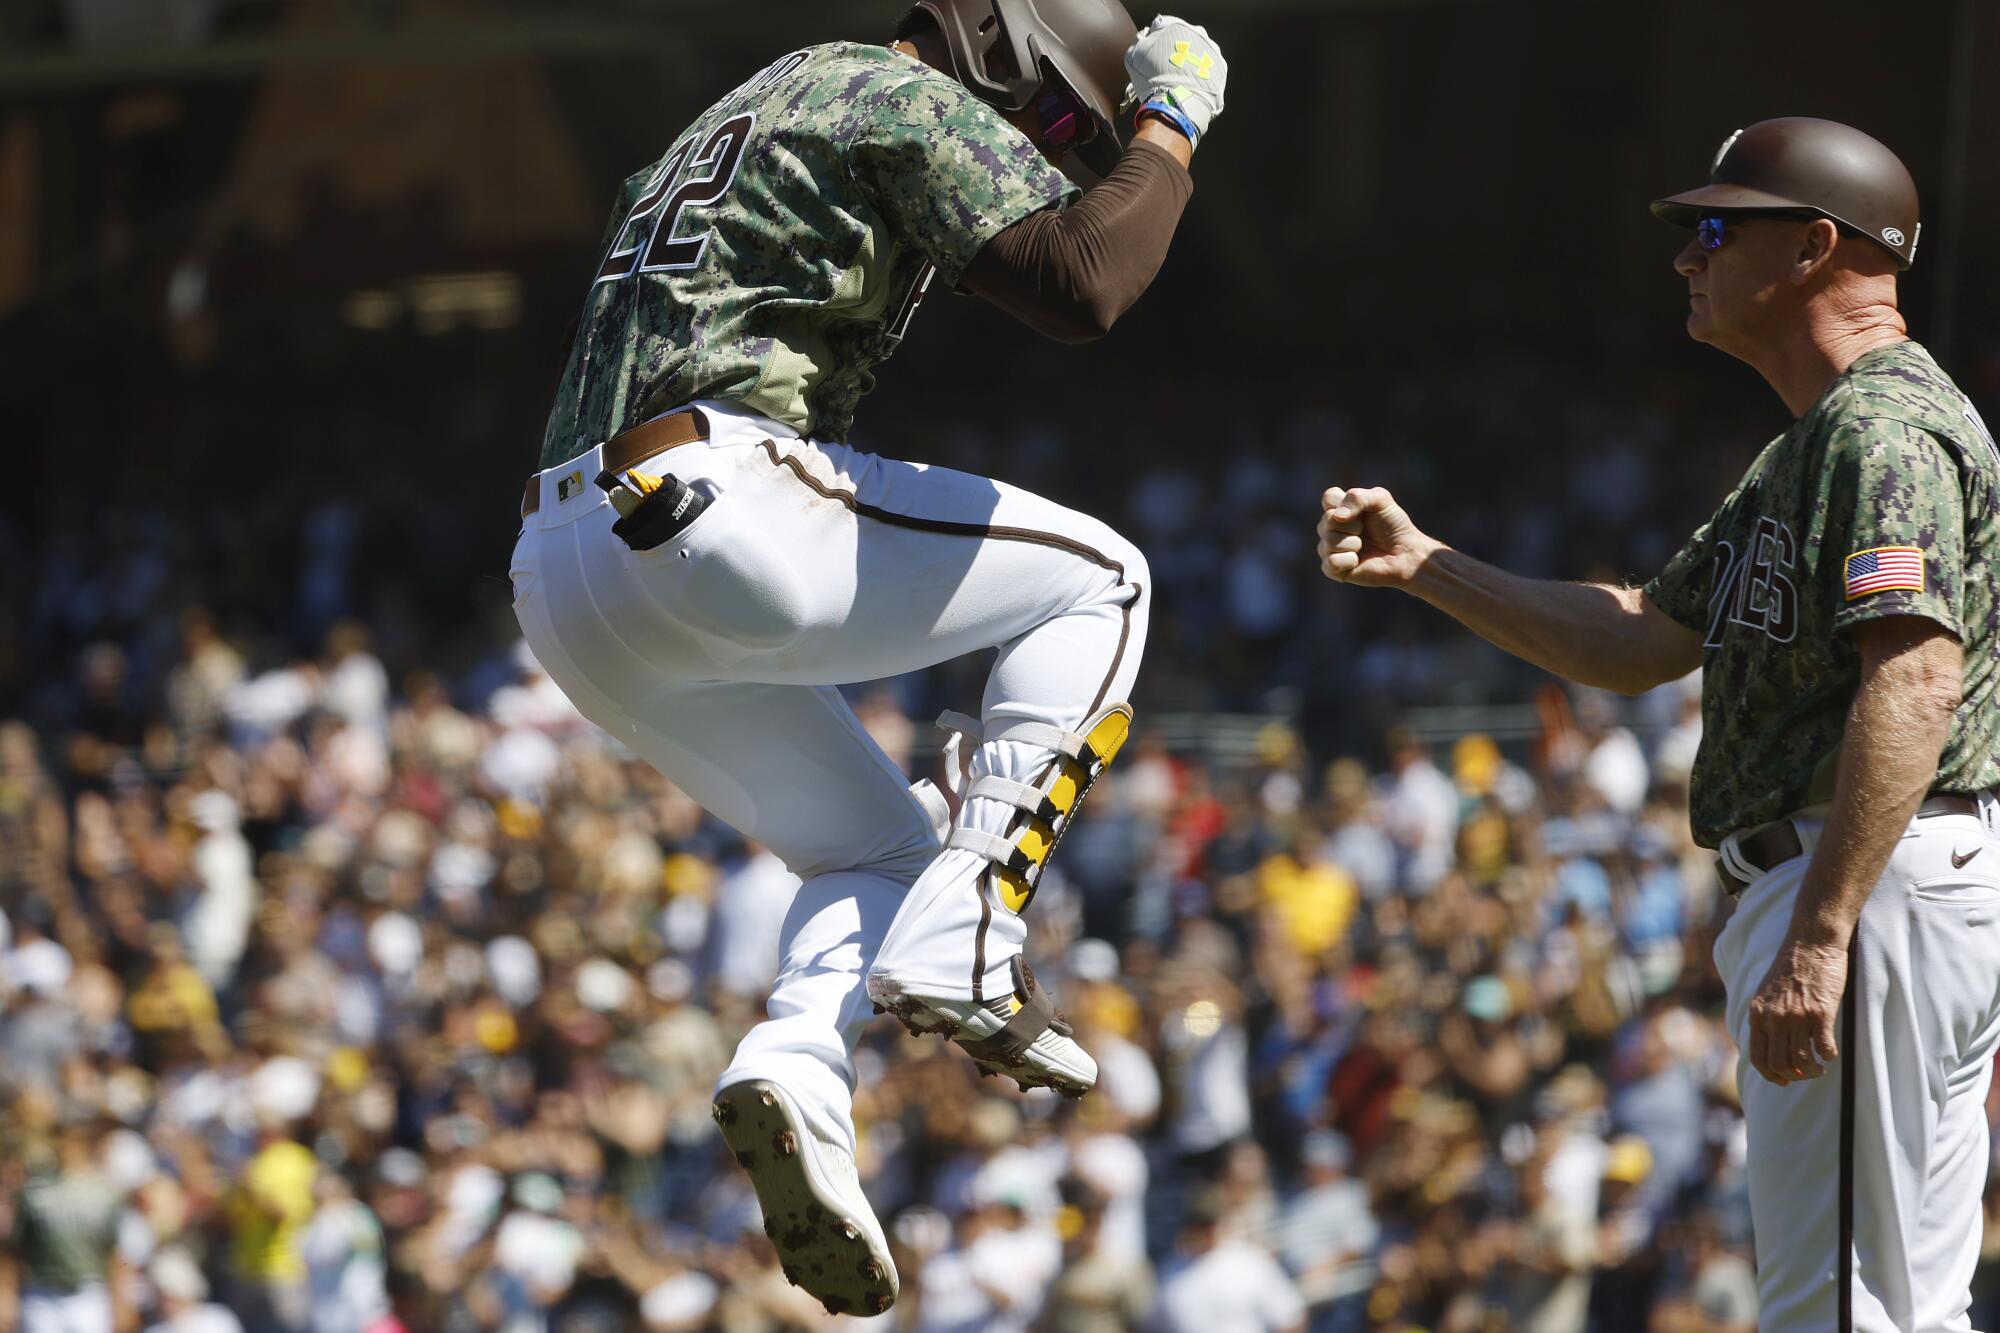 Padres finish home slate by routing Cardinals - The San Diego